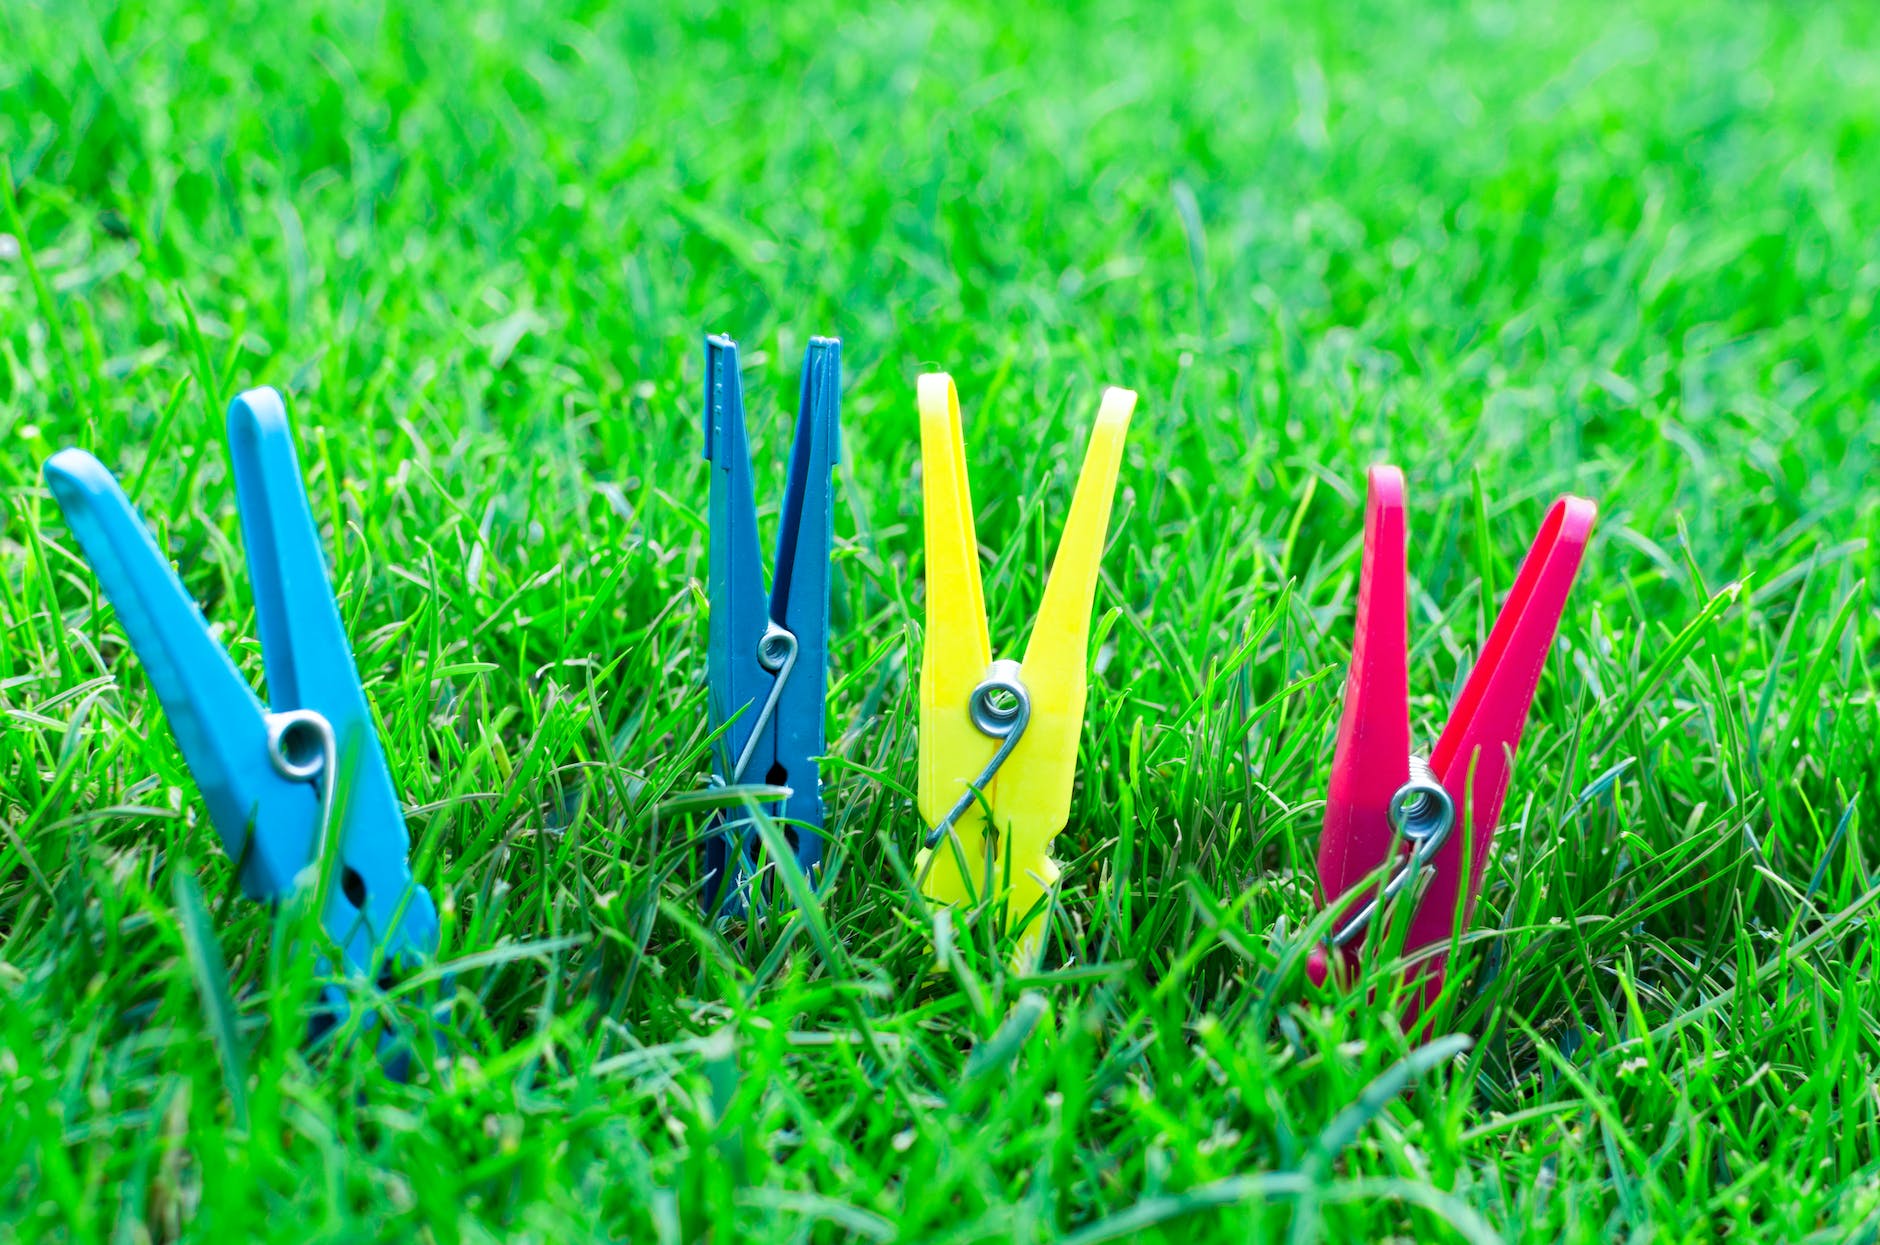 two blue one yellow and one pink clothes clips on green grass